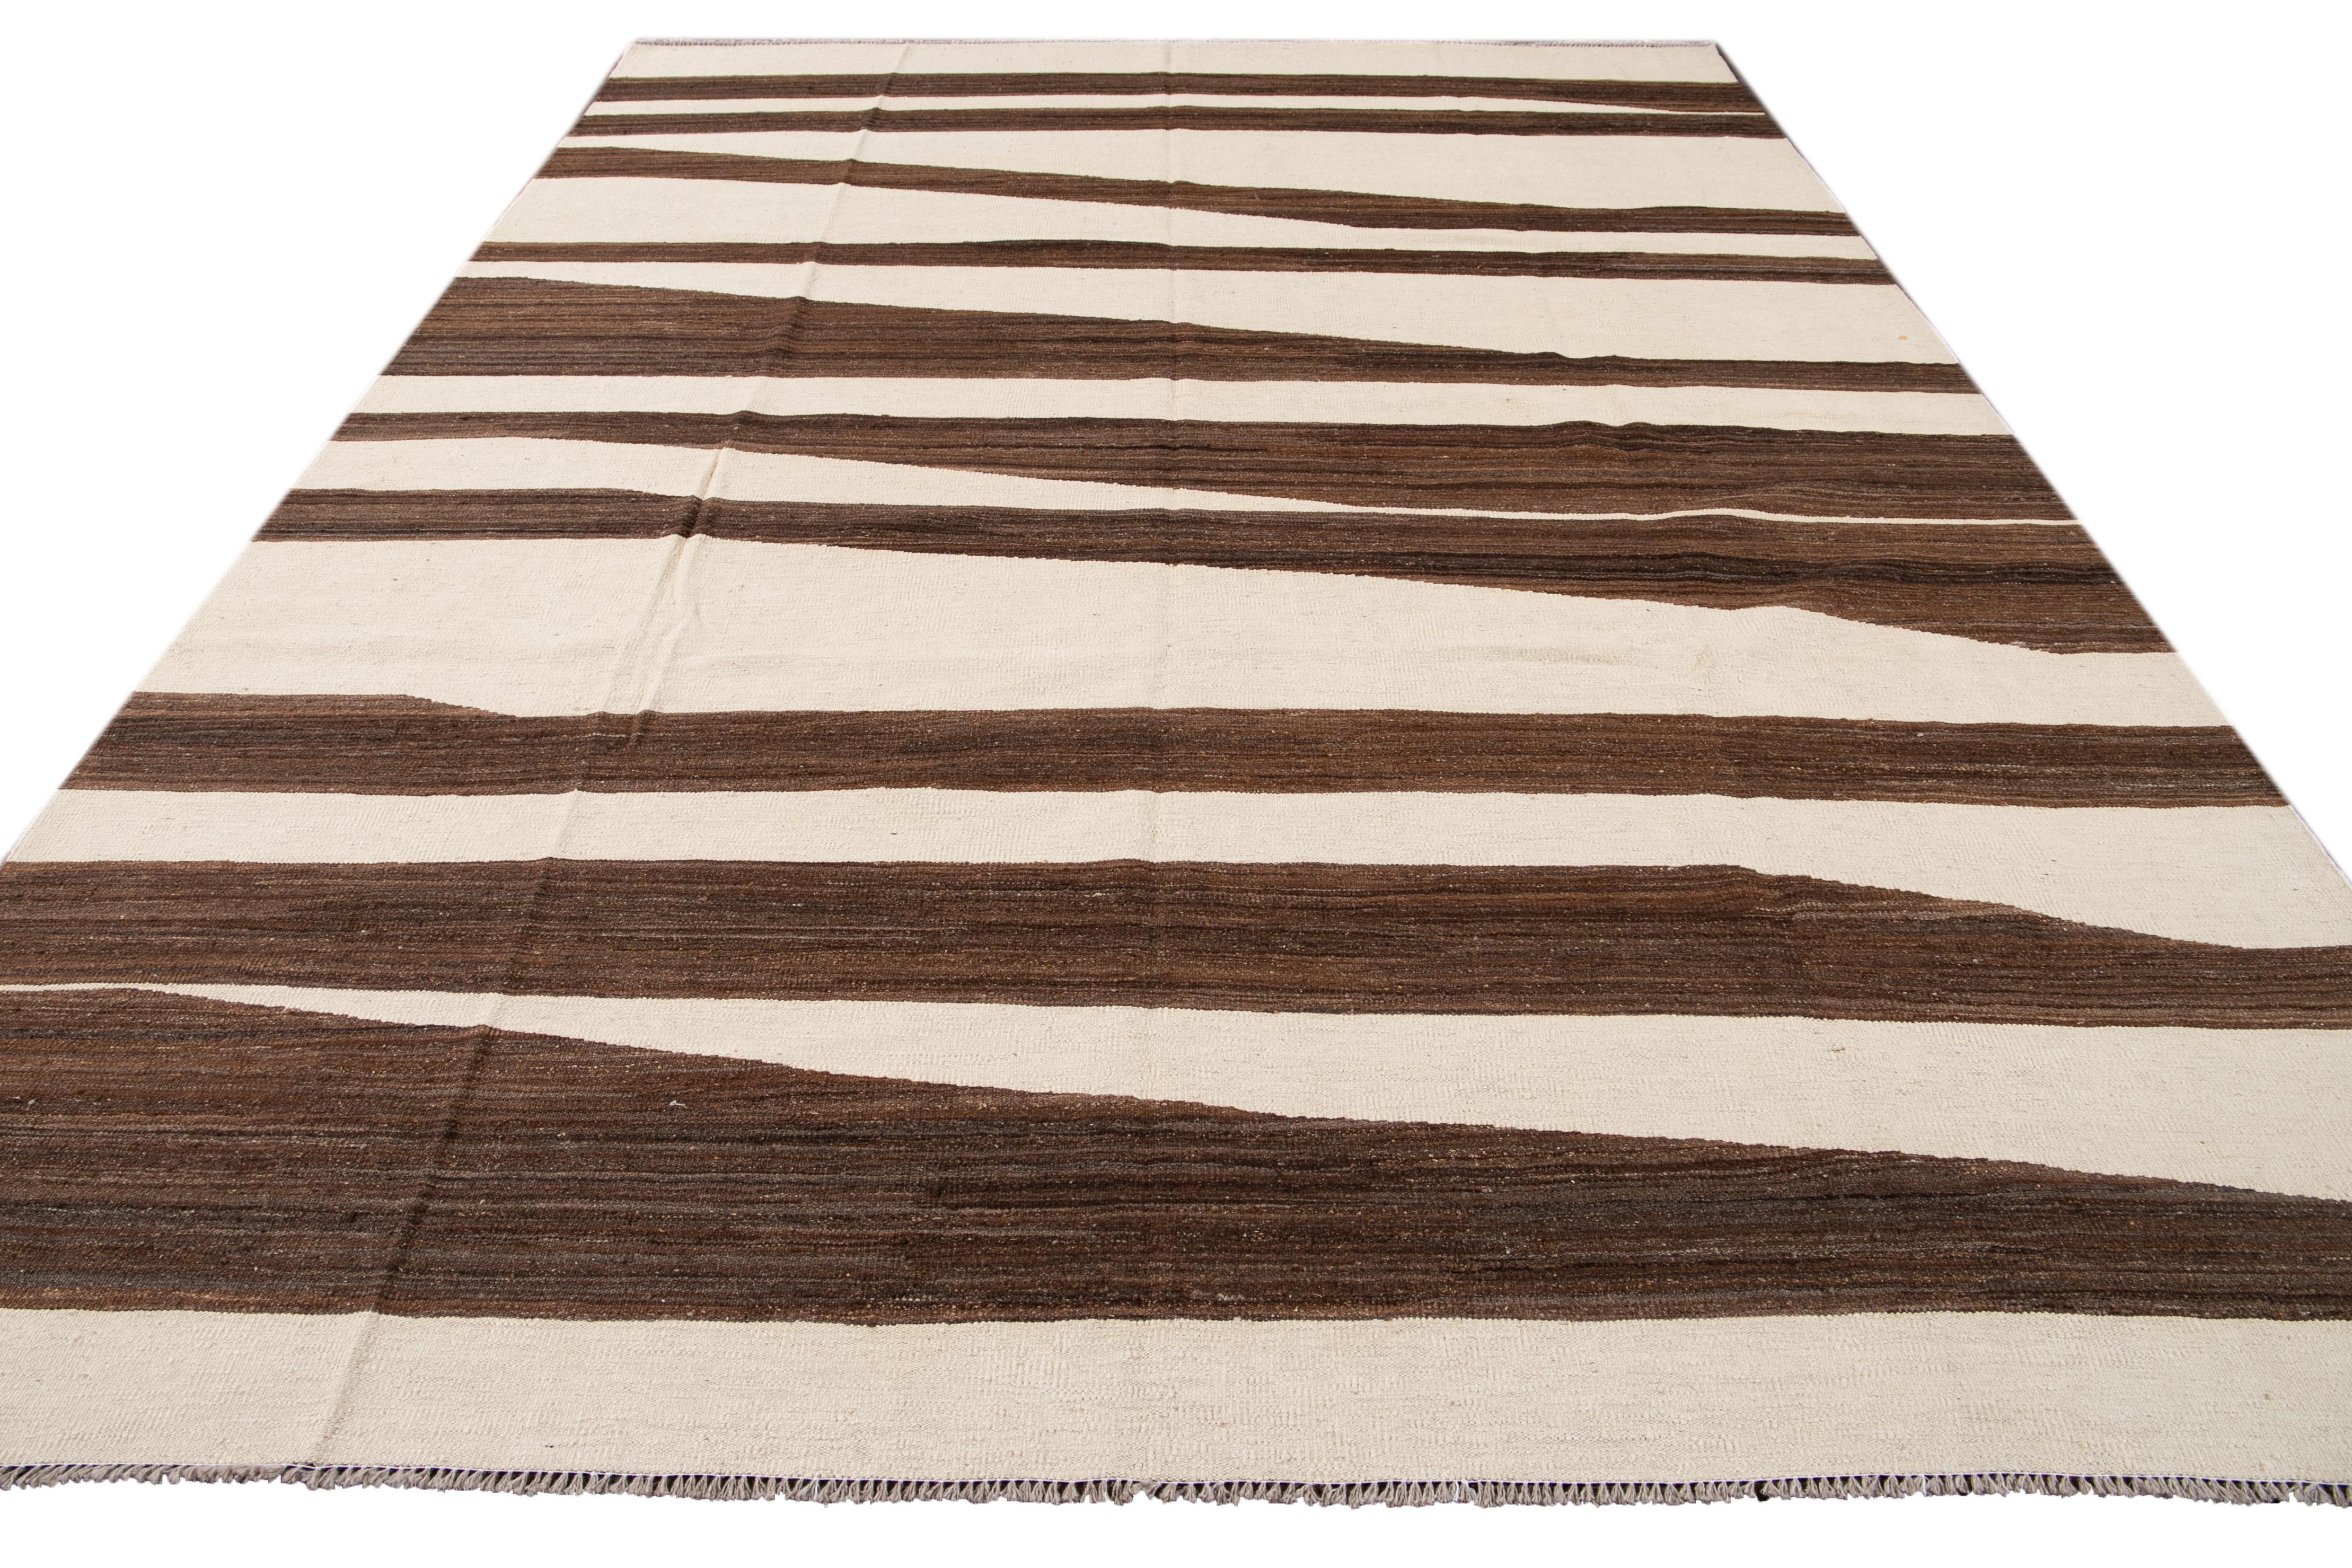 Indian Modern Kilim Flatweave Wool Rug with Brown And Beige Design For Sale